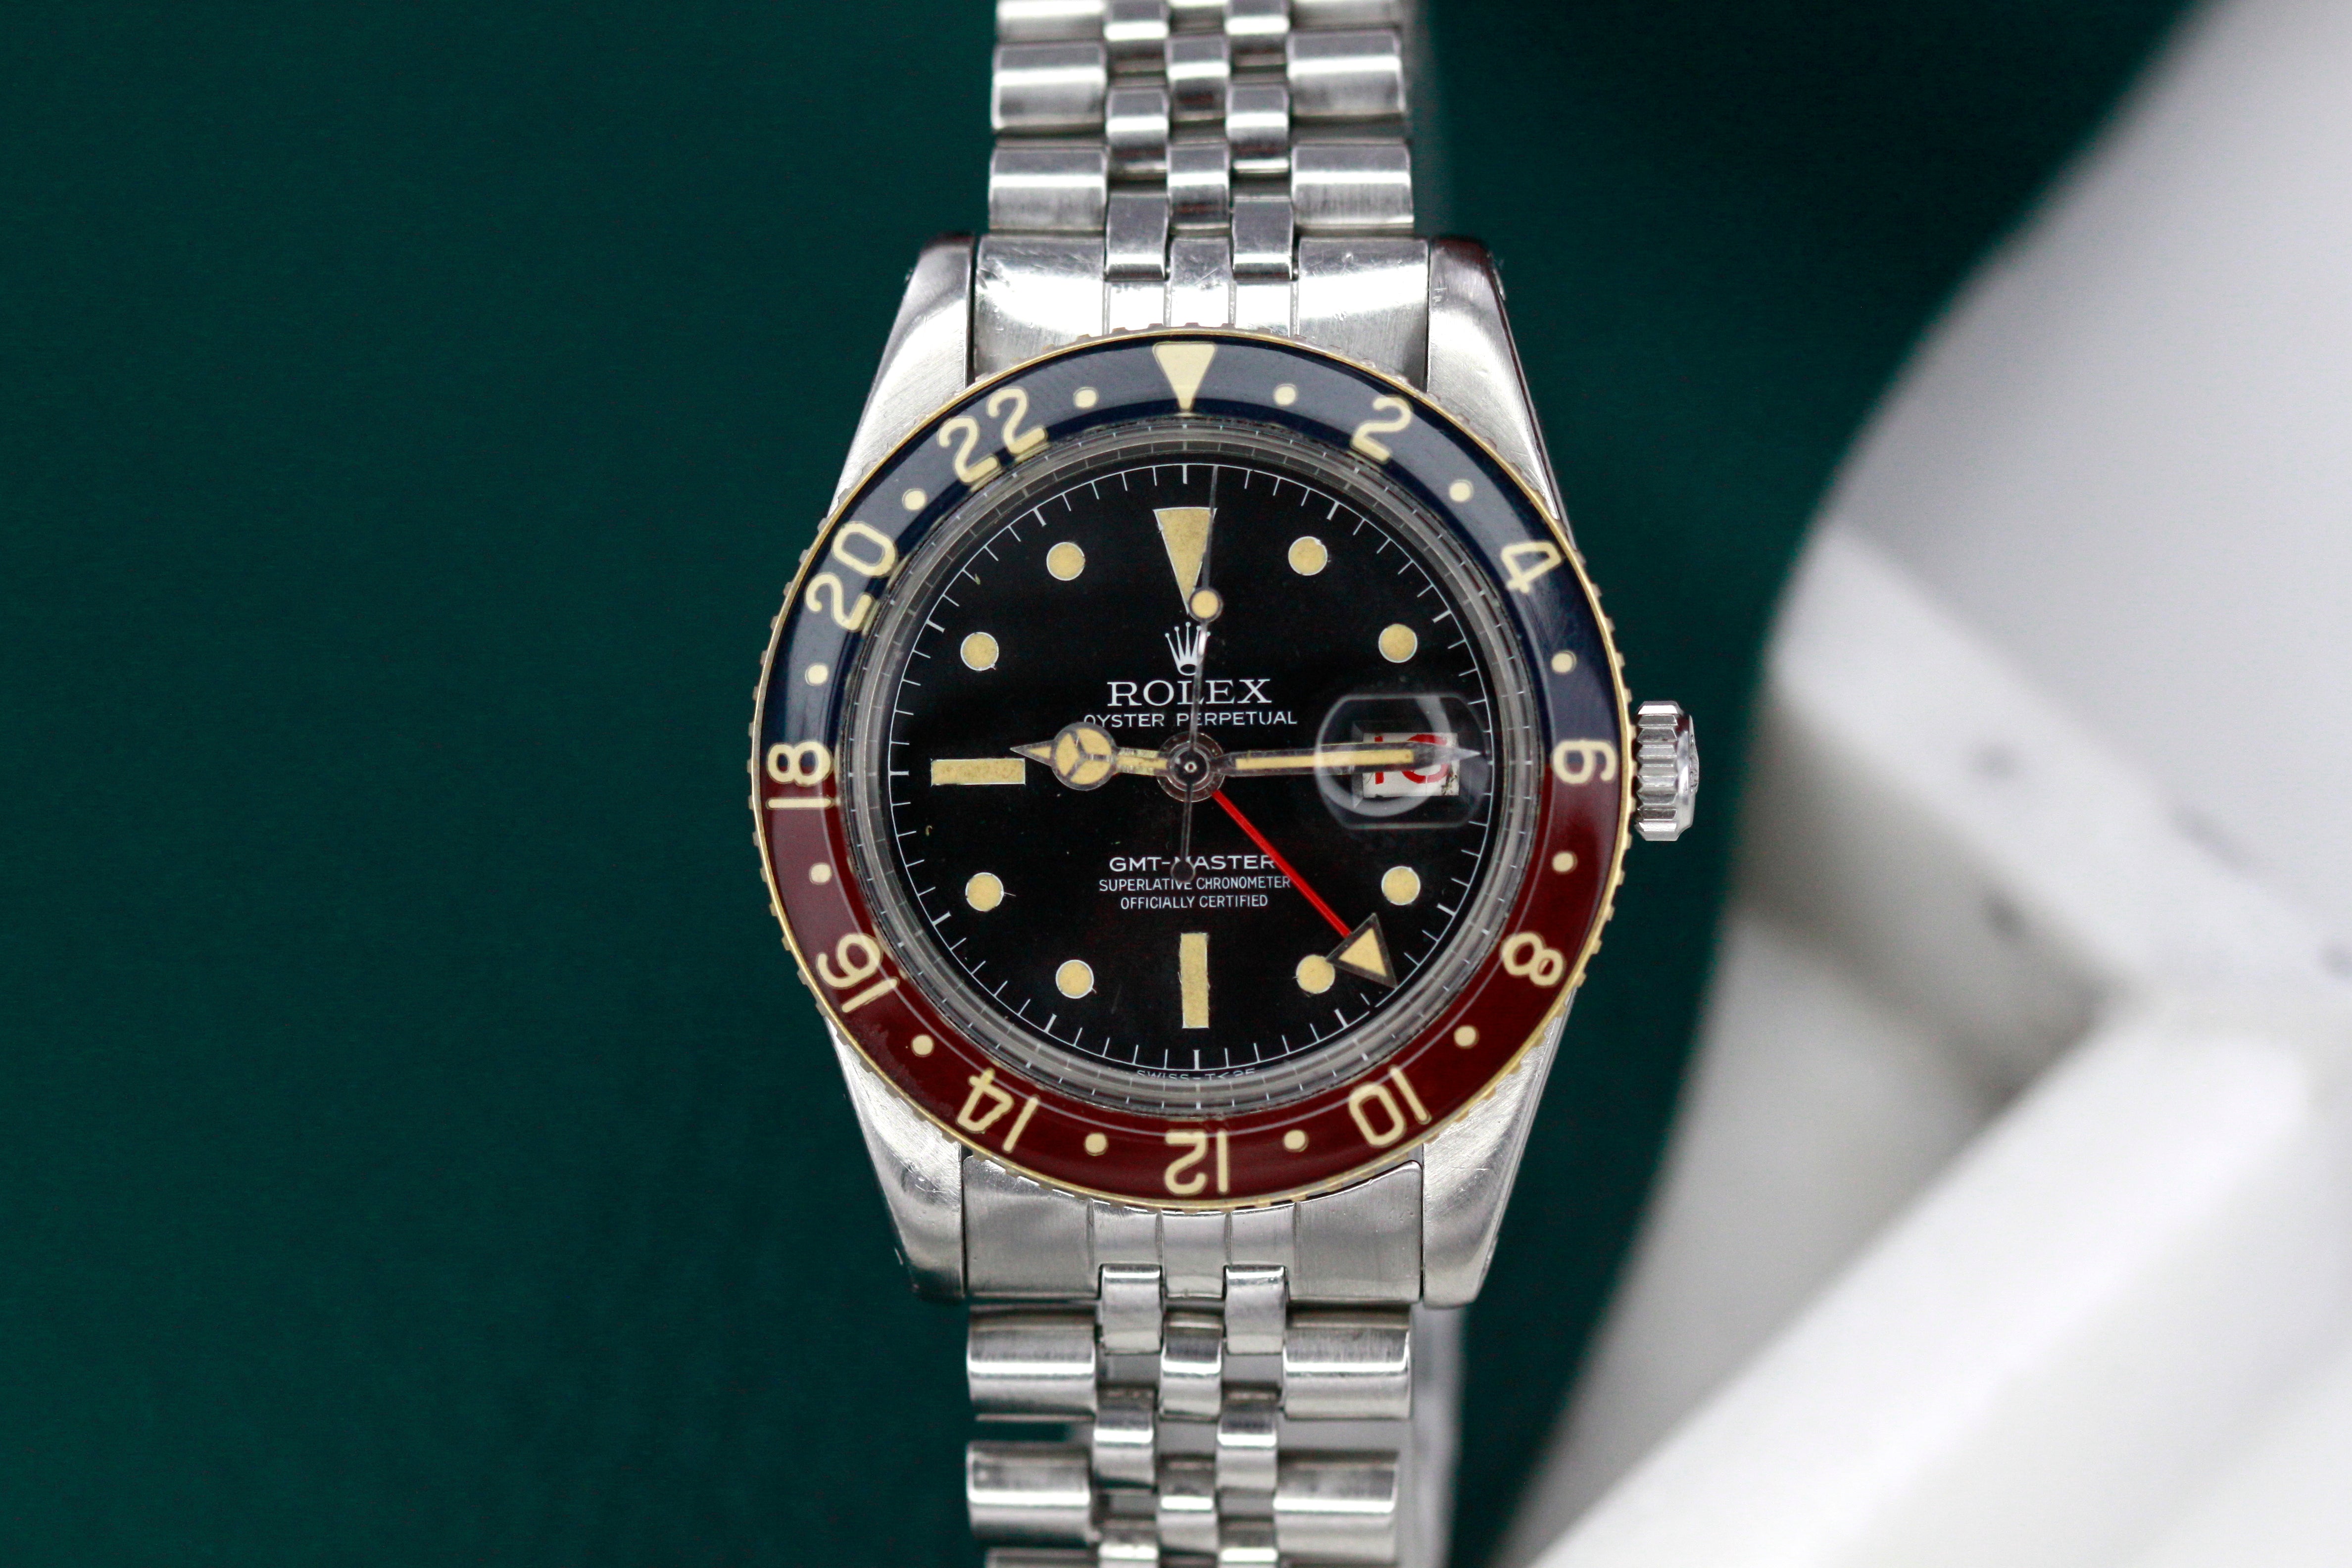 Rolex GMT Ref 6542 from 1958 Tritium dial - Serviced